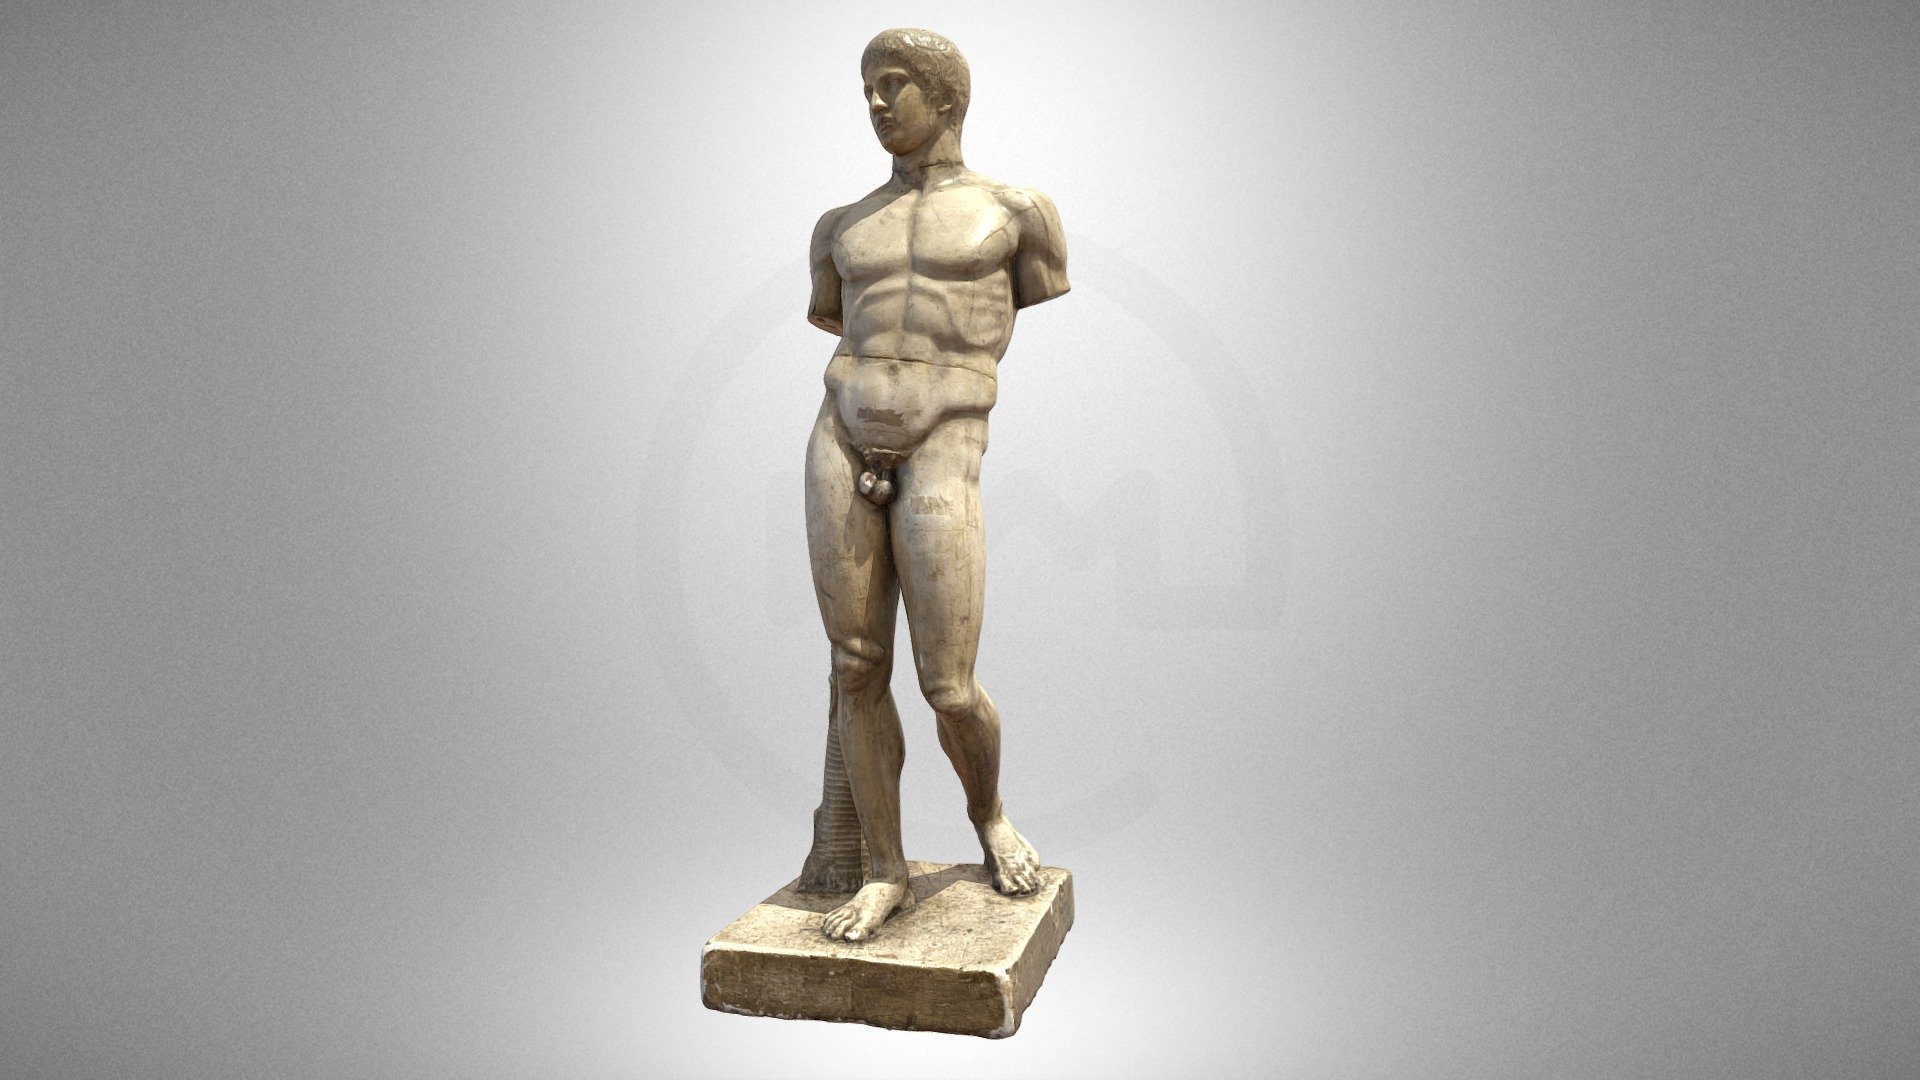 "Doryphoros" (carrying a spear)